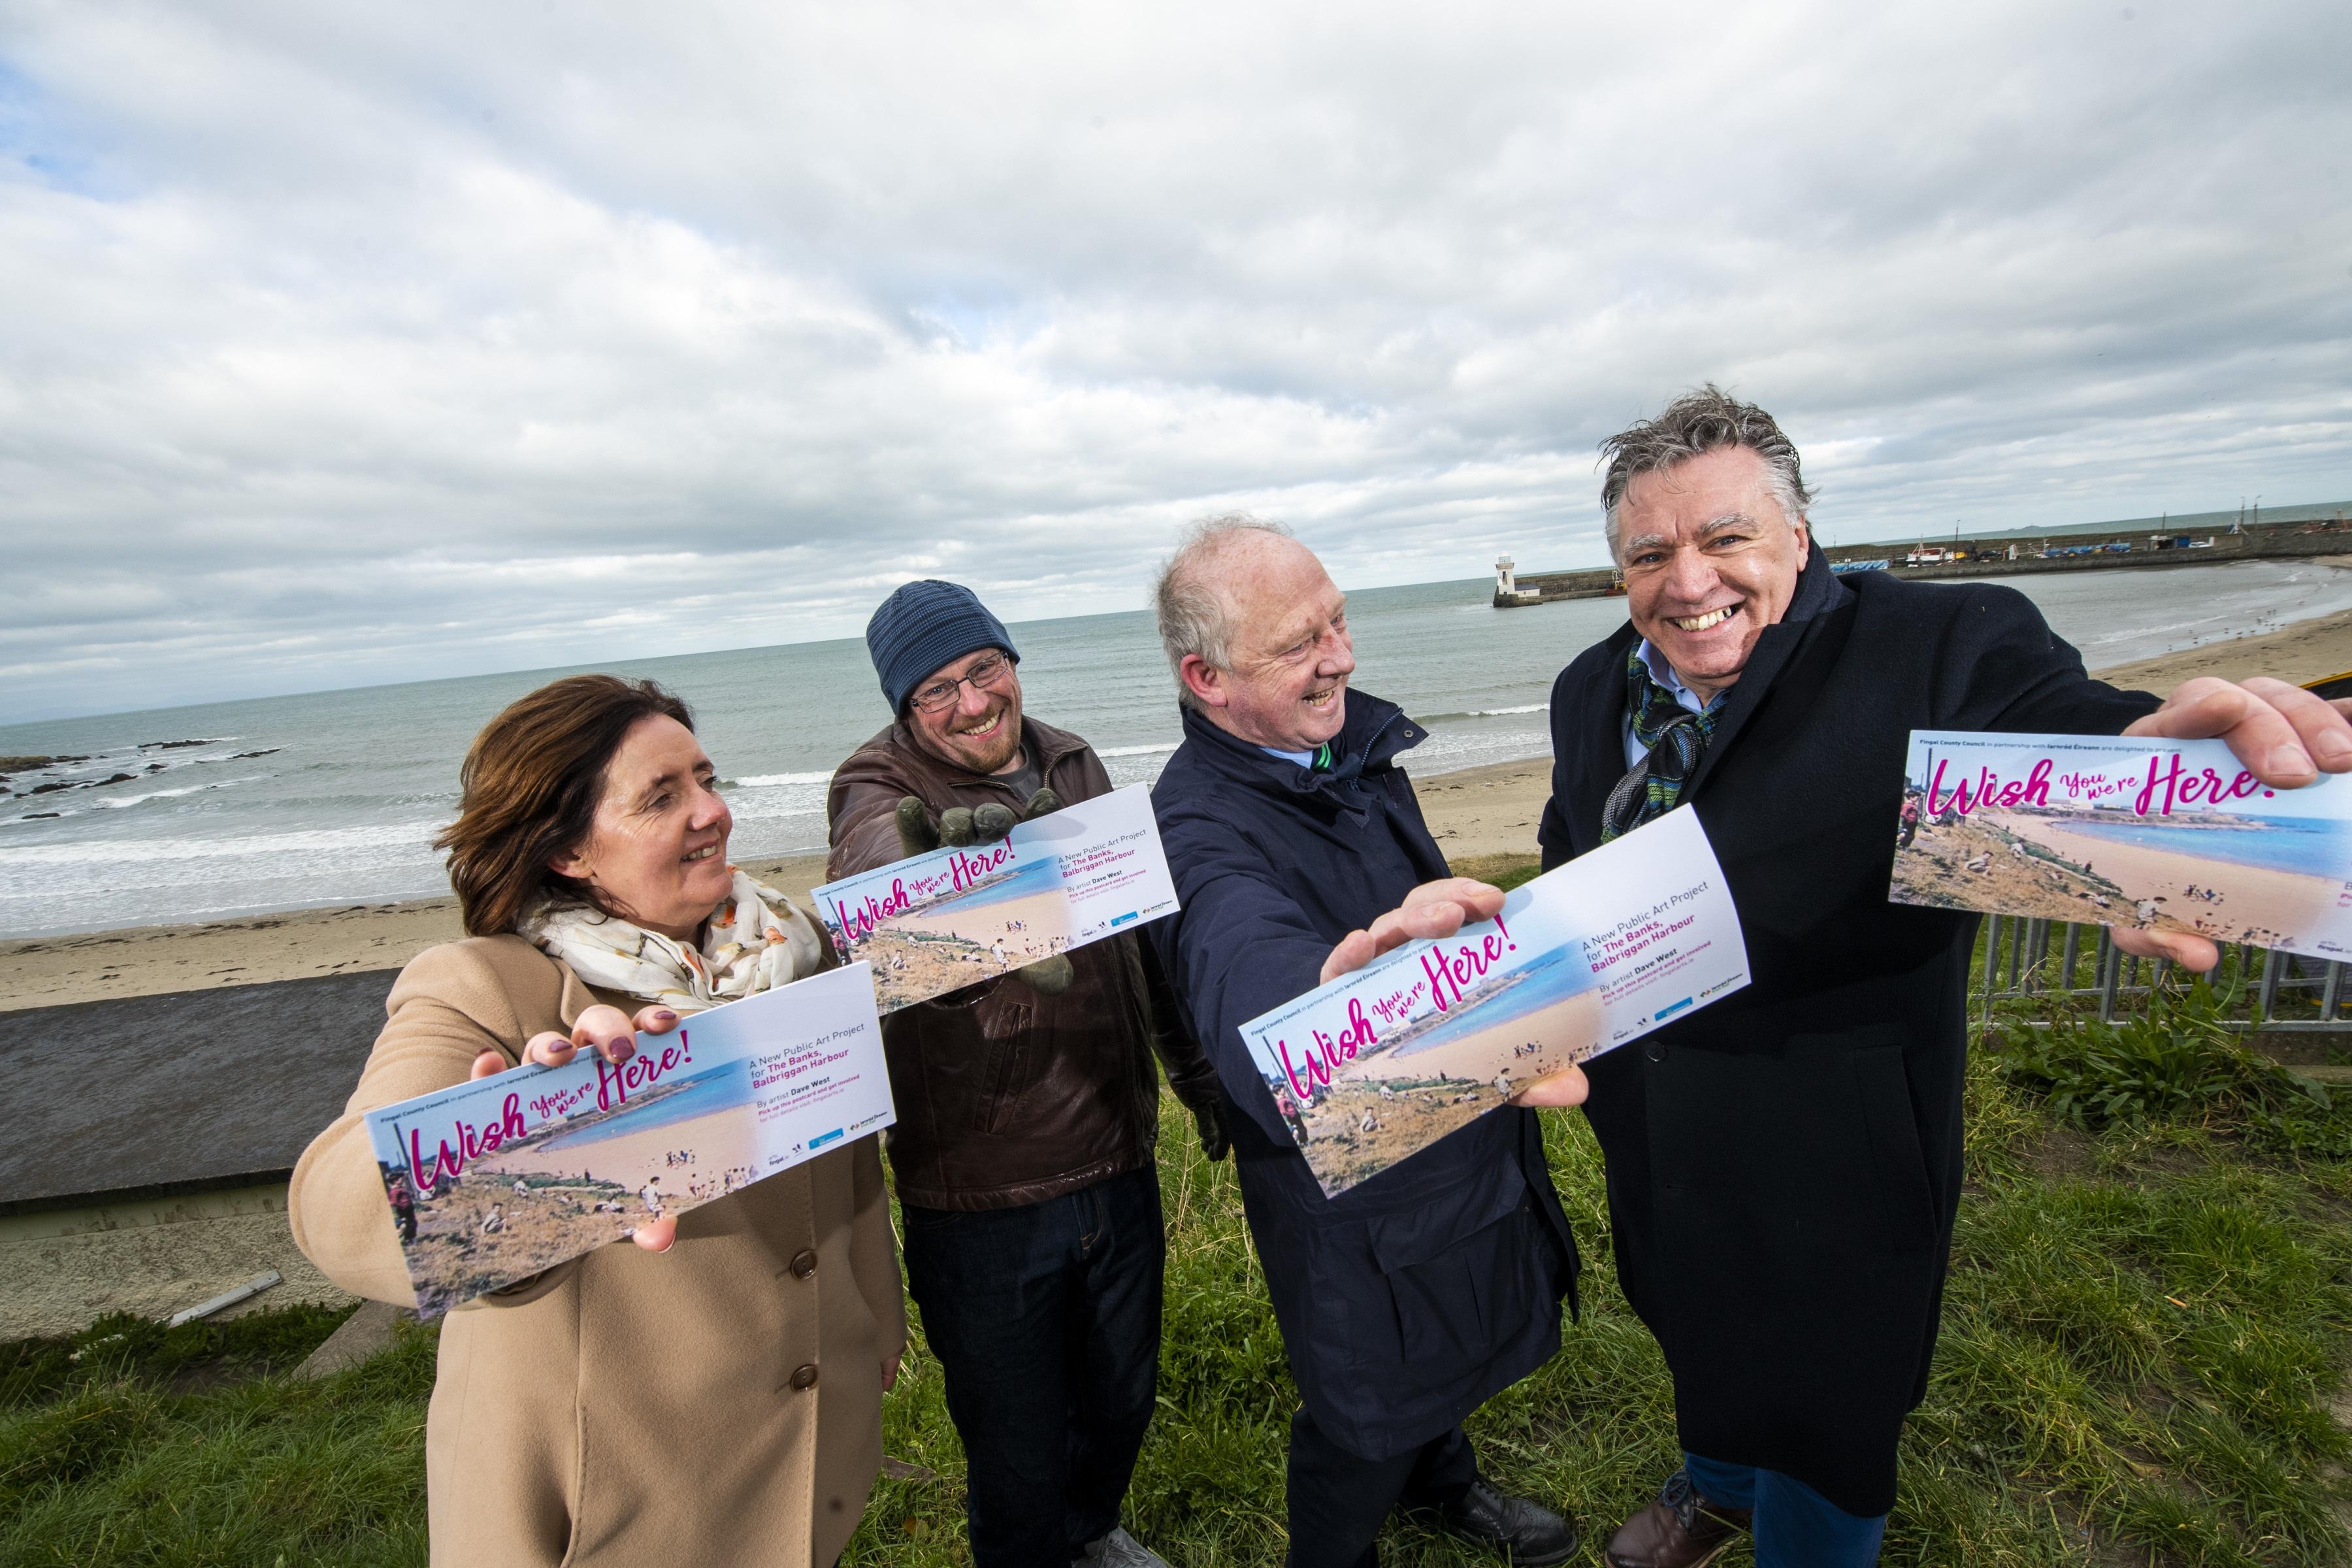 Councillors Launch of Wish you were here Dave West Balbriggan